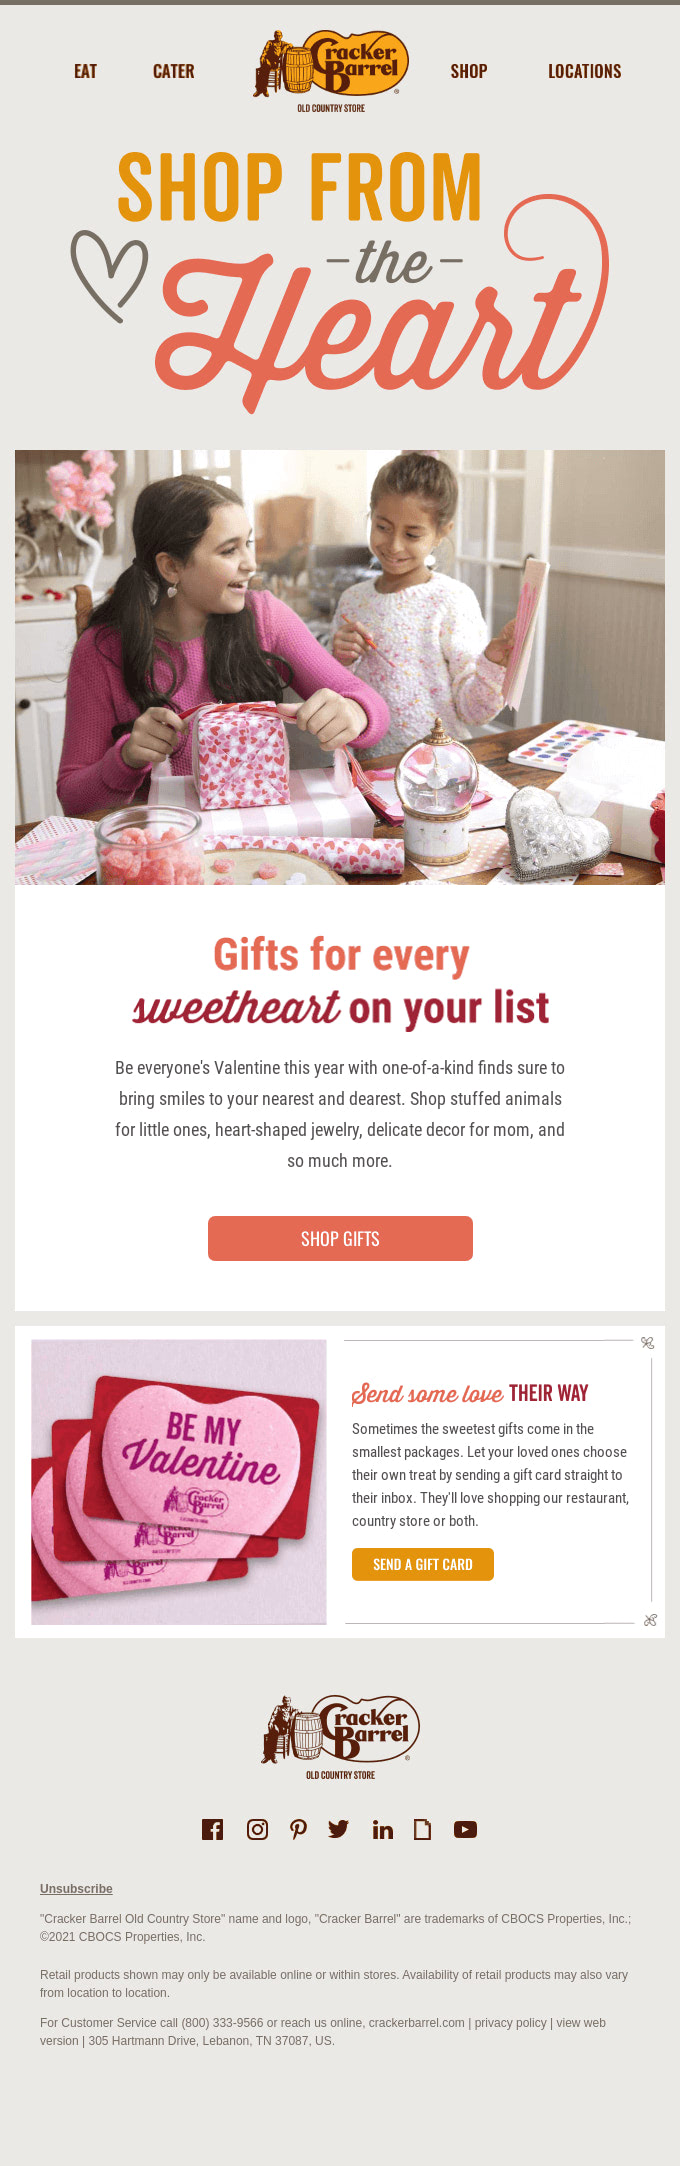 Subject Line Ideas for February Newsletters